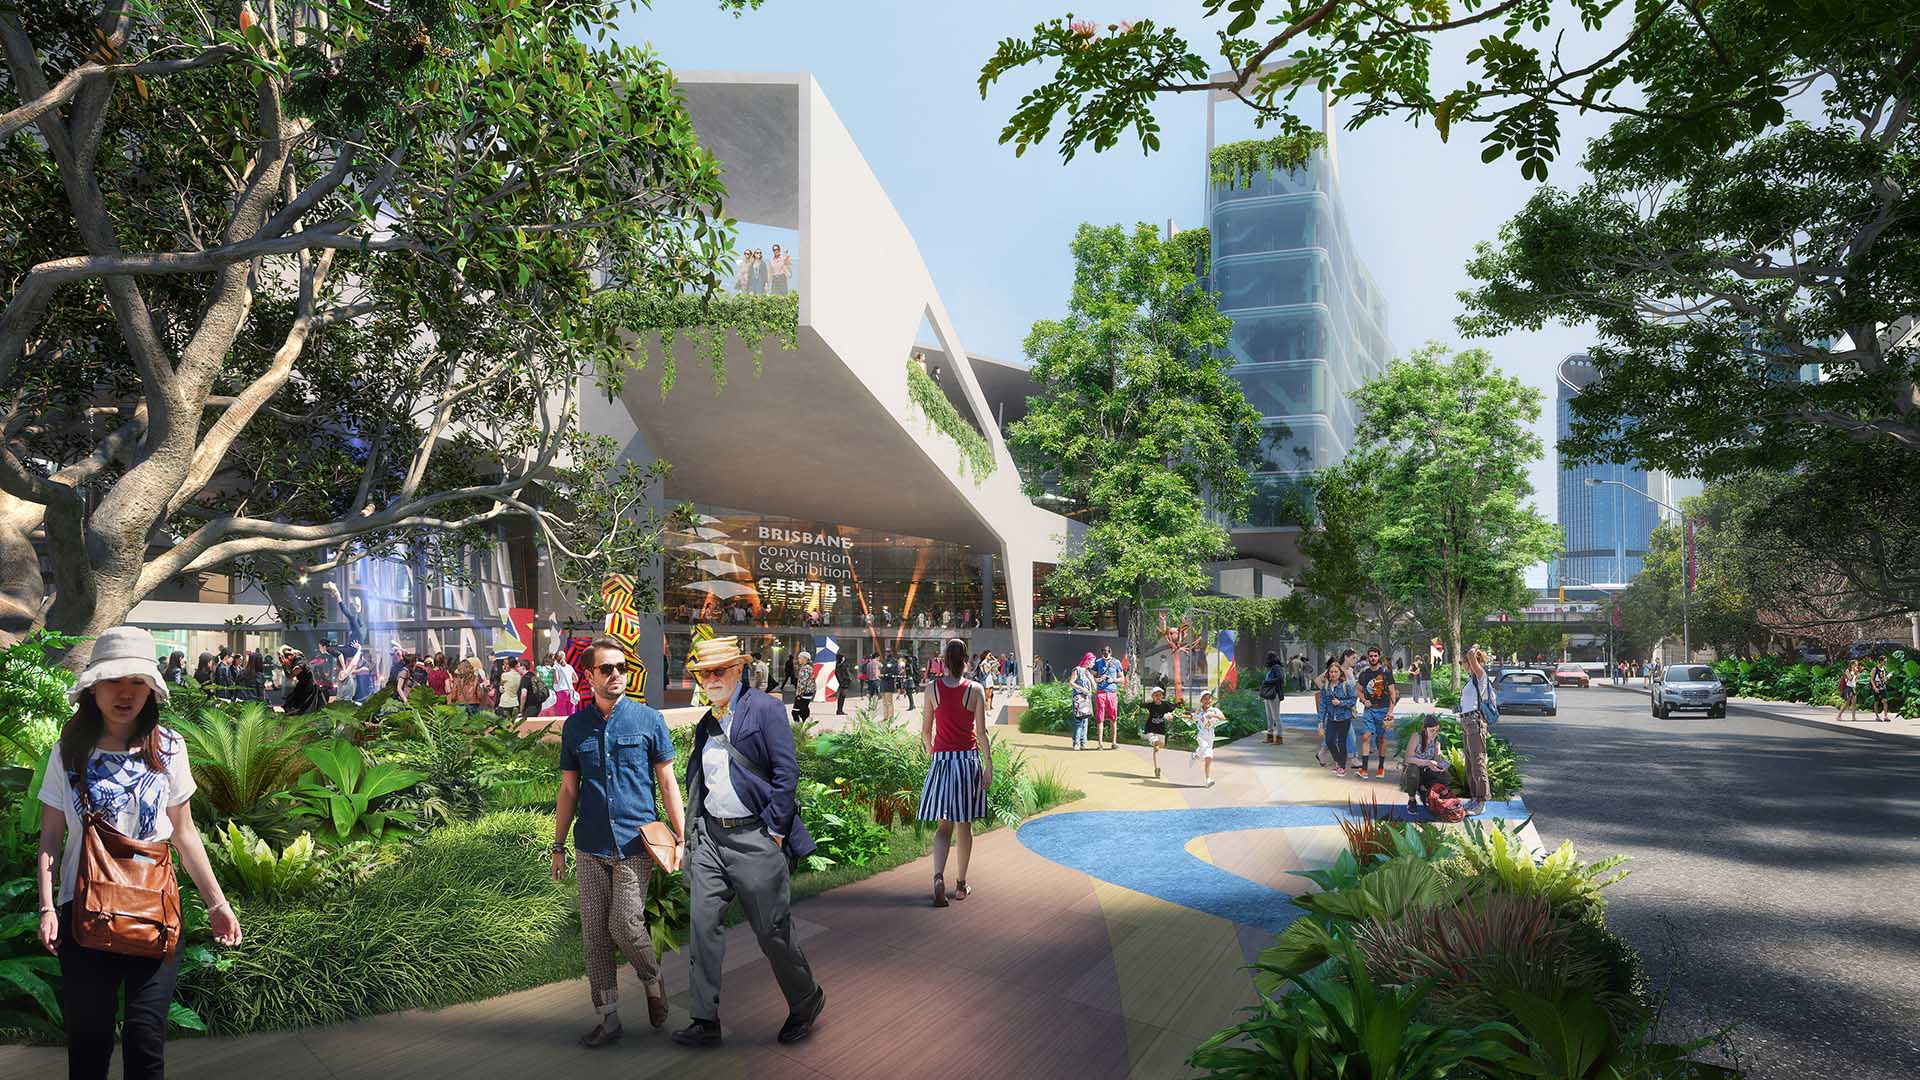 An Expanded Lagoon, a Rainforest Treetop Walk, No More Piazza: They're All Part of the Plan for South Bank